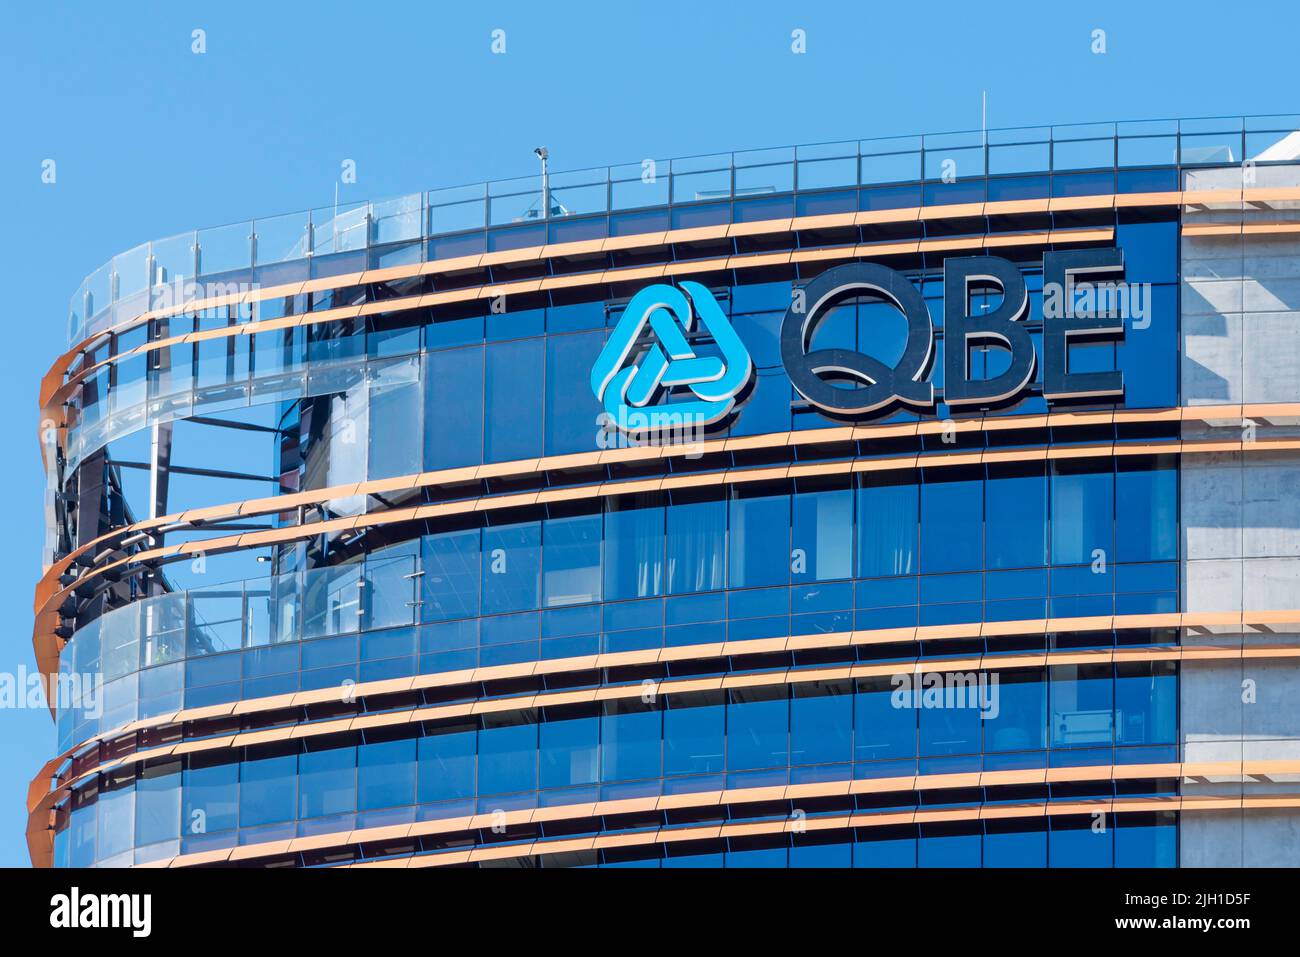 The logo and name of the Insurance giant, QBE on a building in Parramatta, Sydney, New South Wales, Australia Stock Photo